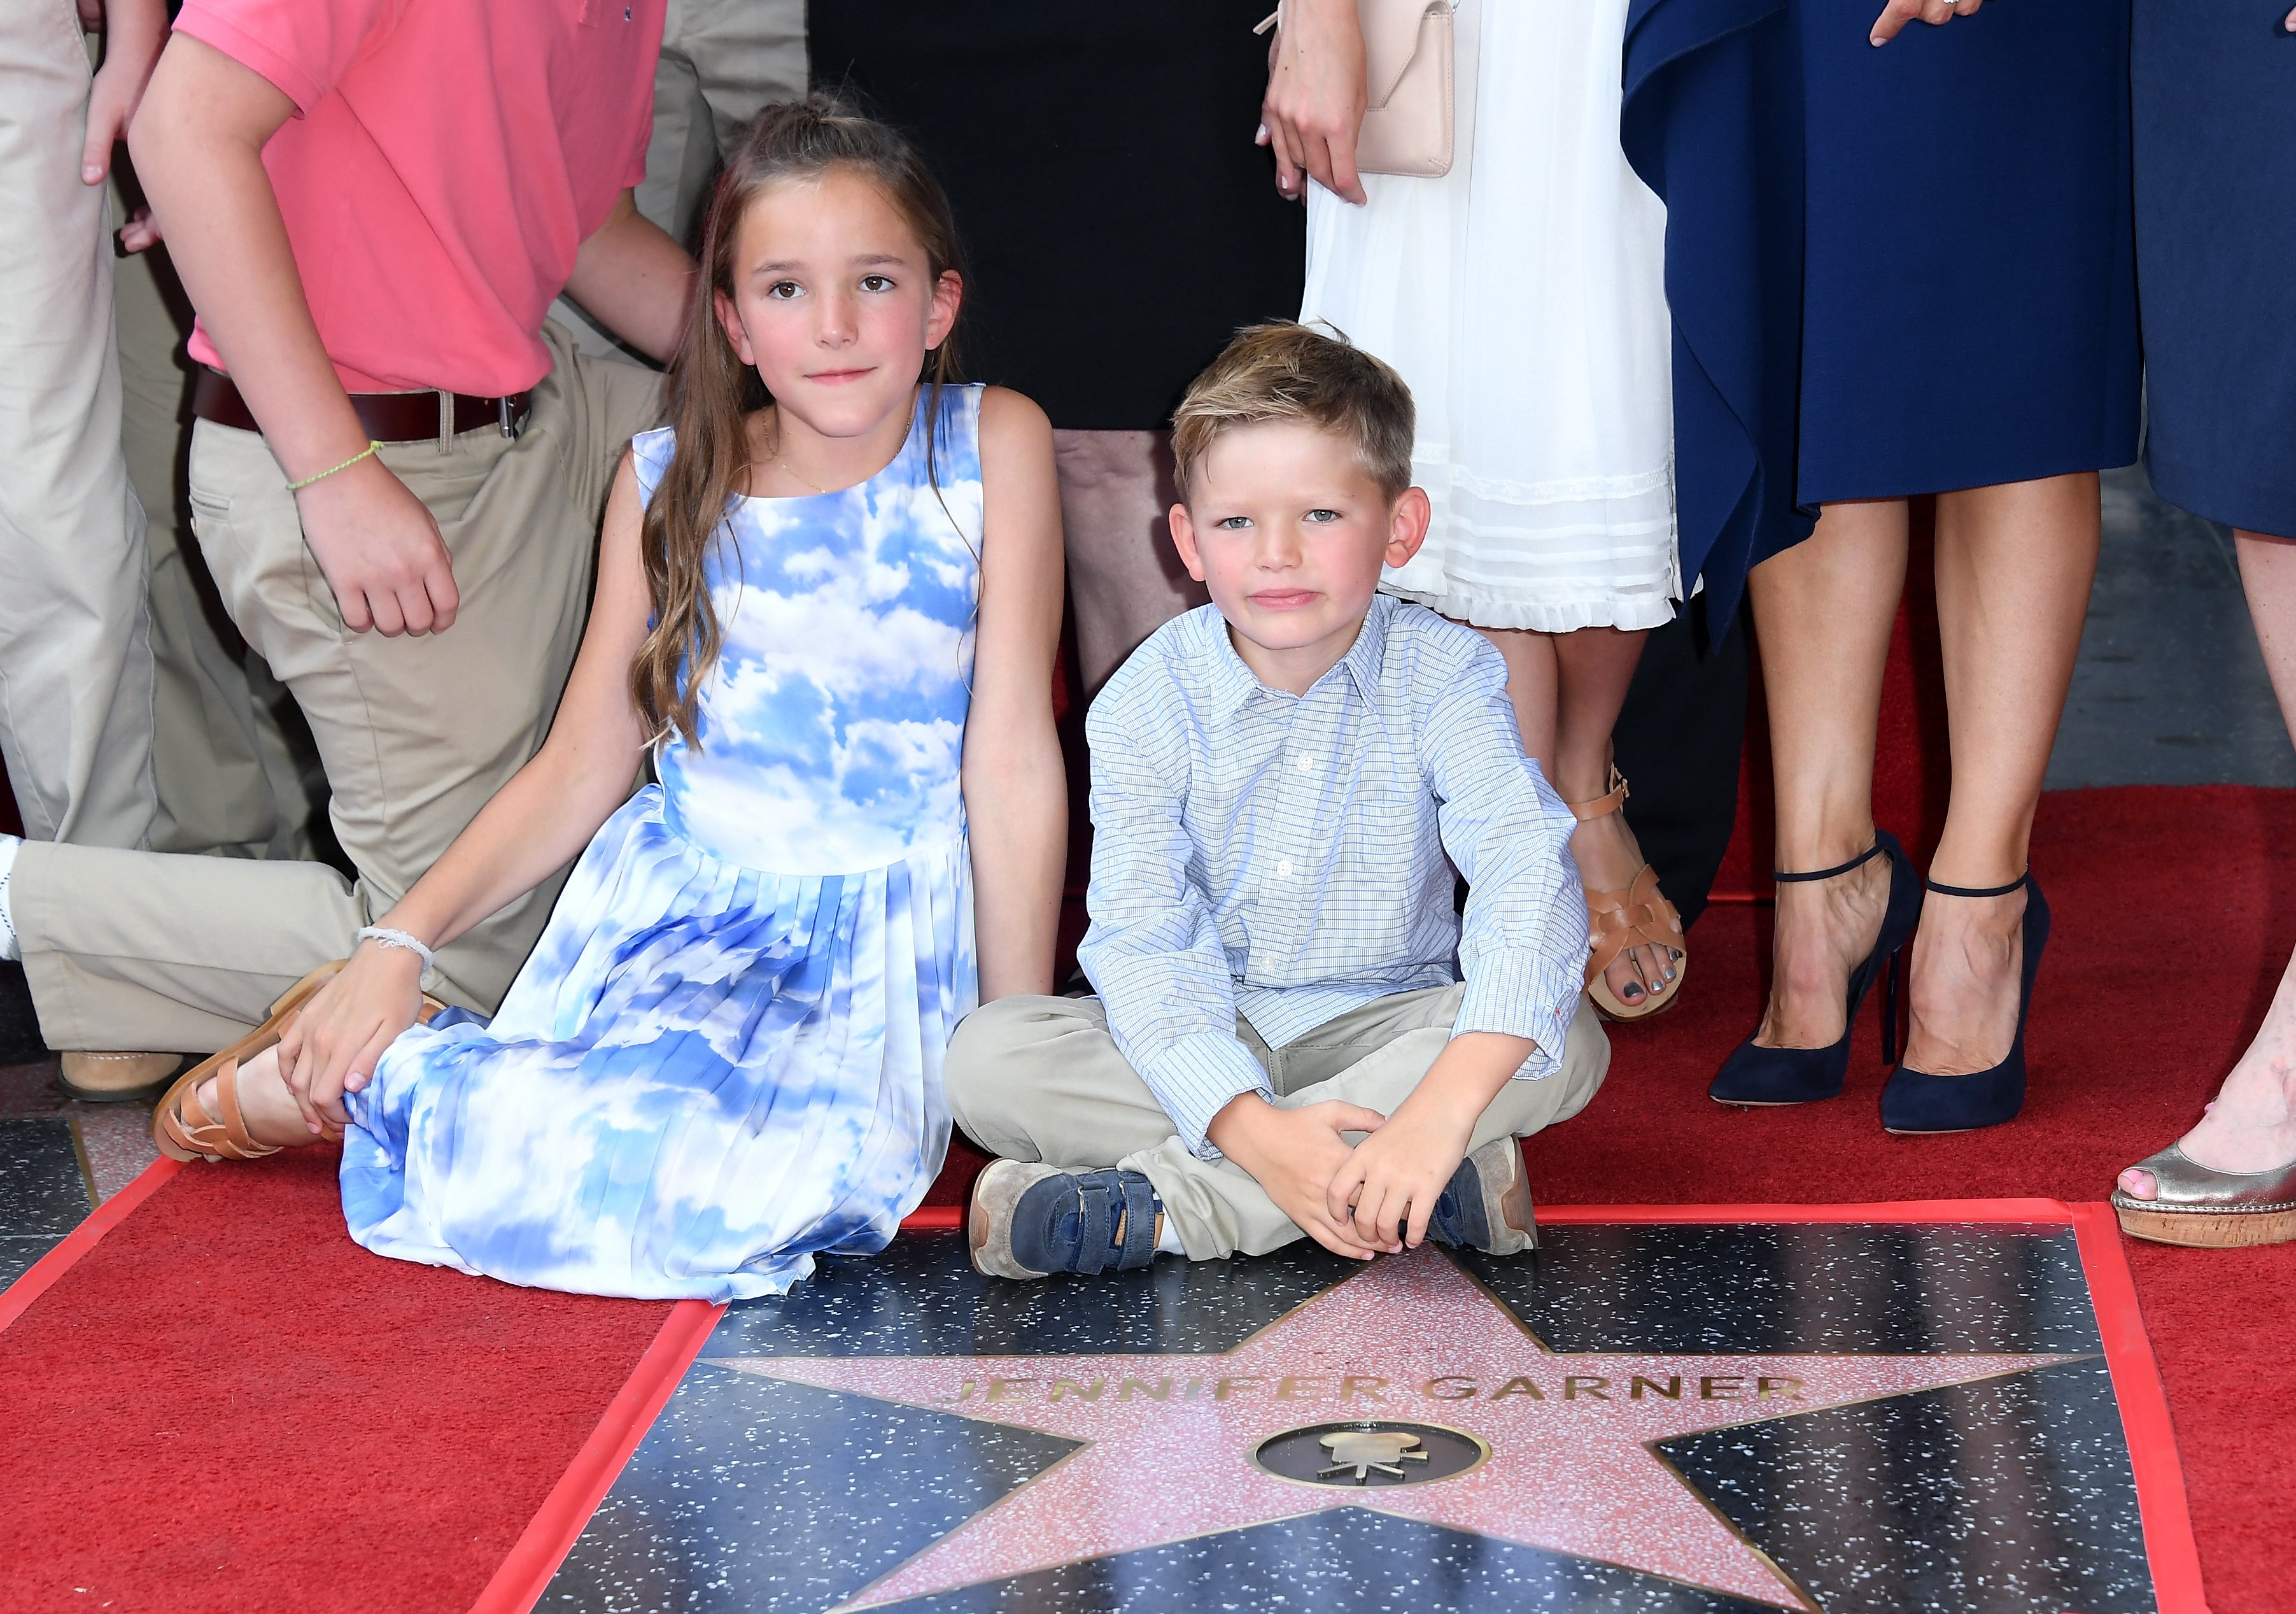 Seraphina Affleck and Samuel Garner Affleck attend the ceremony honoring their mother Jennifer Garner with a star on the Hollywood Walk of Fame on August 20, 2018 in Hollywood, California.  / Source: Getty Images